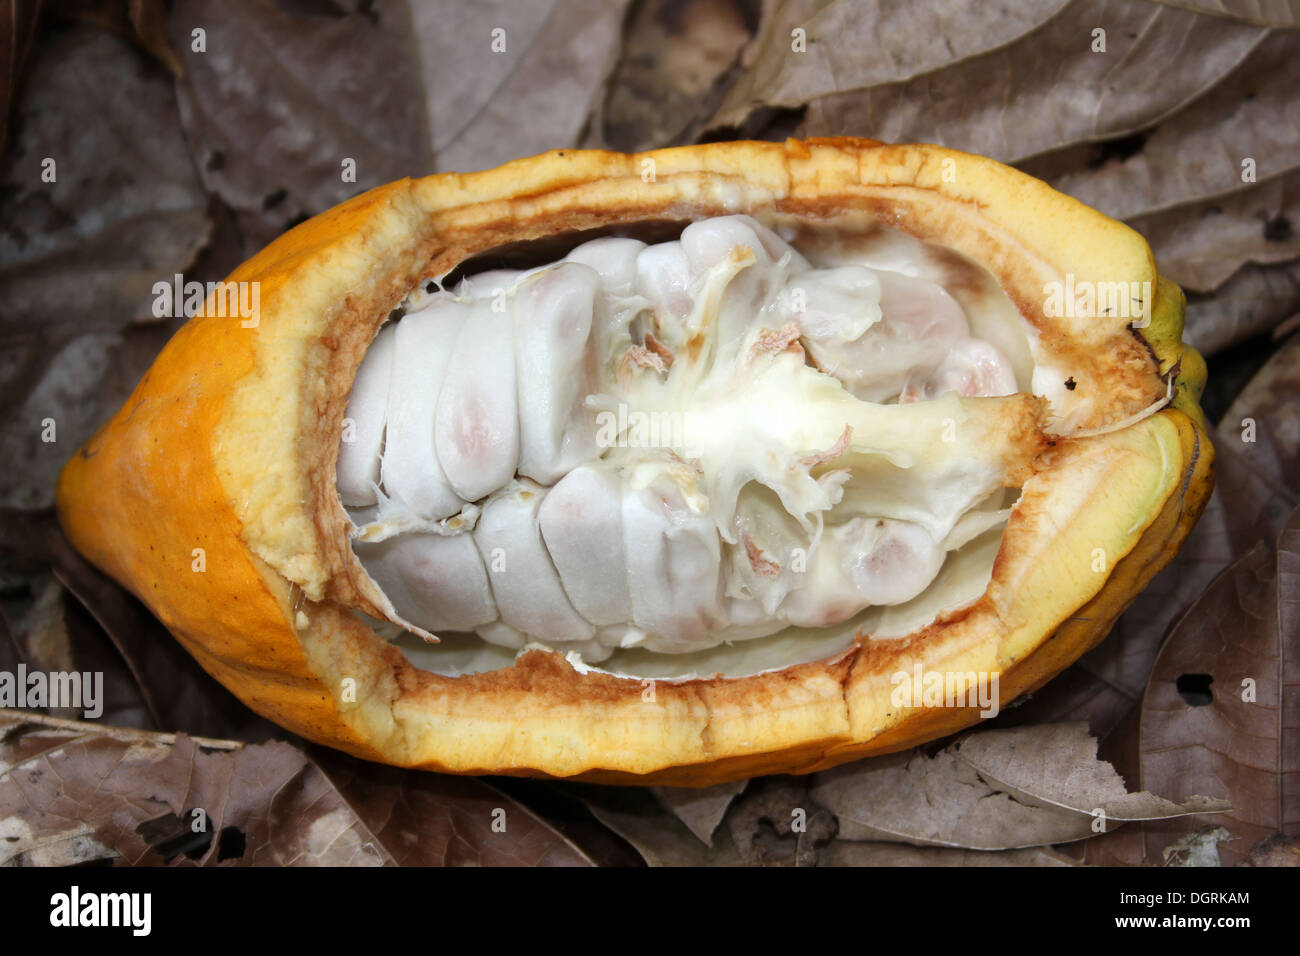 Cocoa Pods Exposed Showing Beans Inside Stock Photo